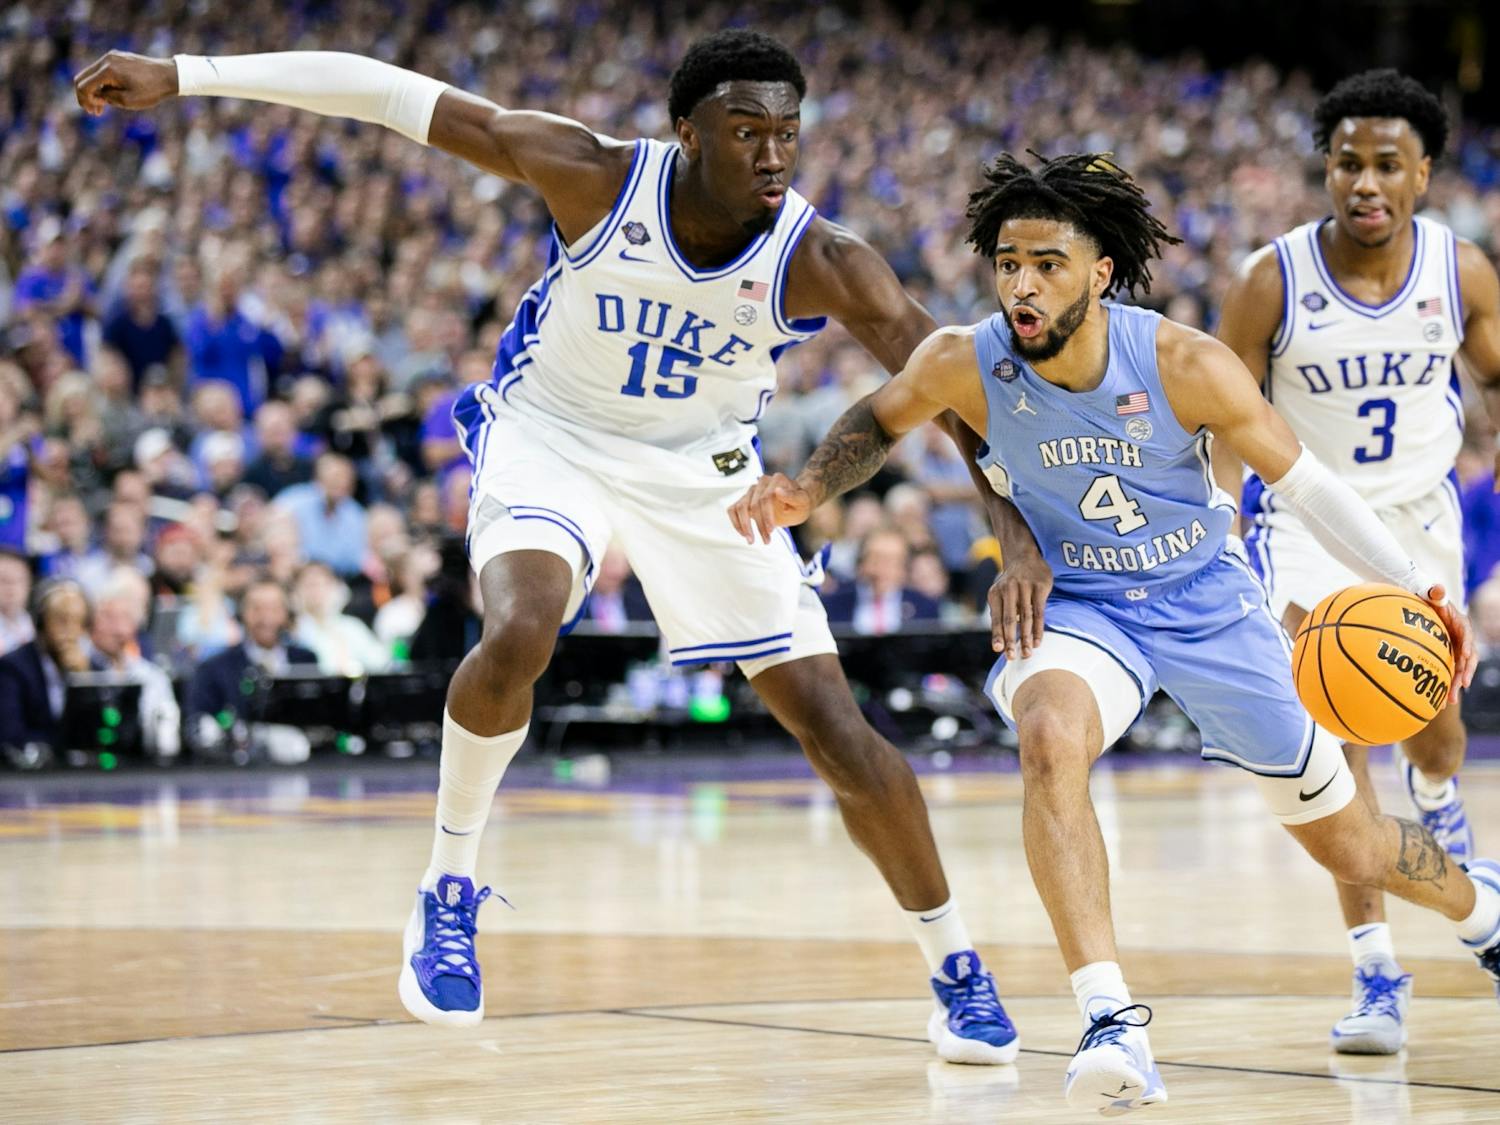 UNC sophomore guard RJ Davis (4) prepares to go up for a layup as Duke sophmore center Mark Williams (15) defends the goal during the Final Four of the NCAA Tournament against Duke in New Orleans on Saturday, April 2, 2022. UNC won 81-77.